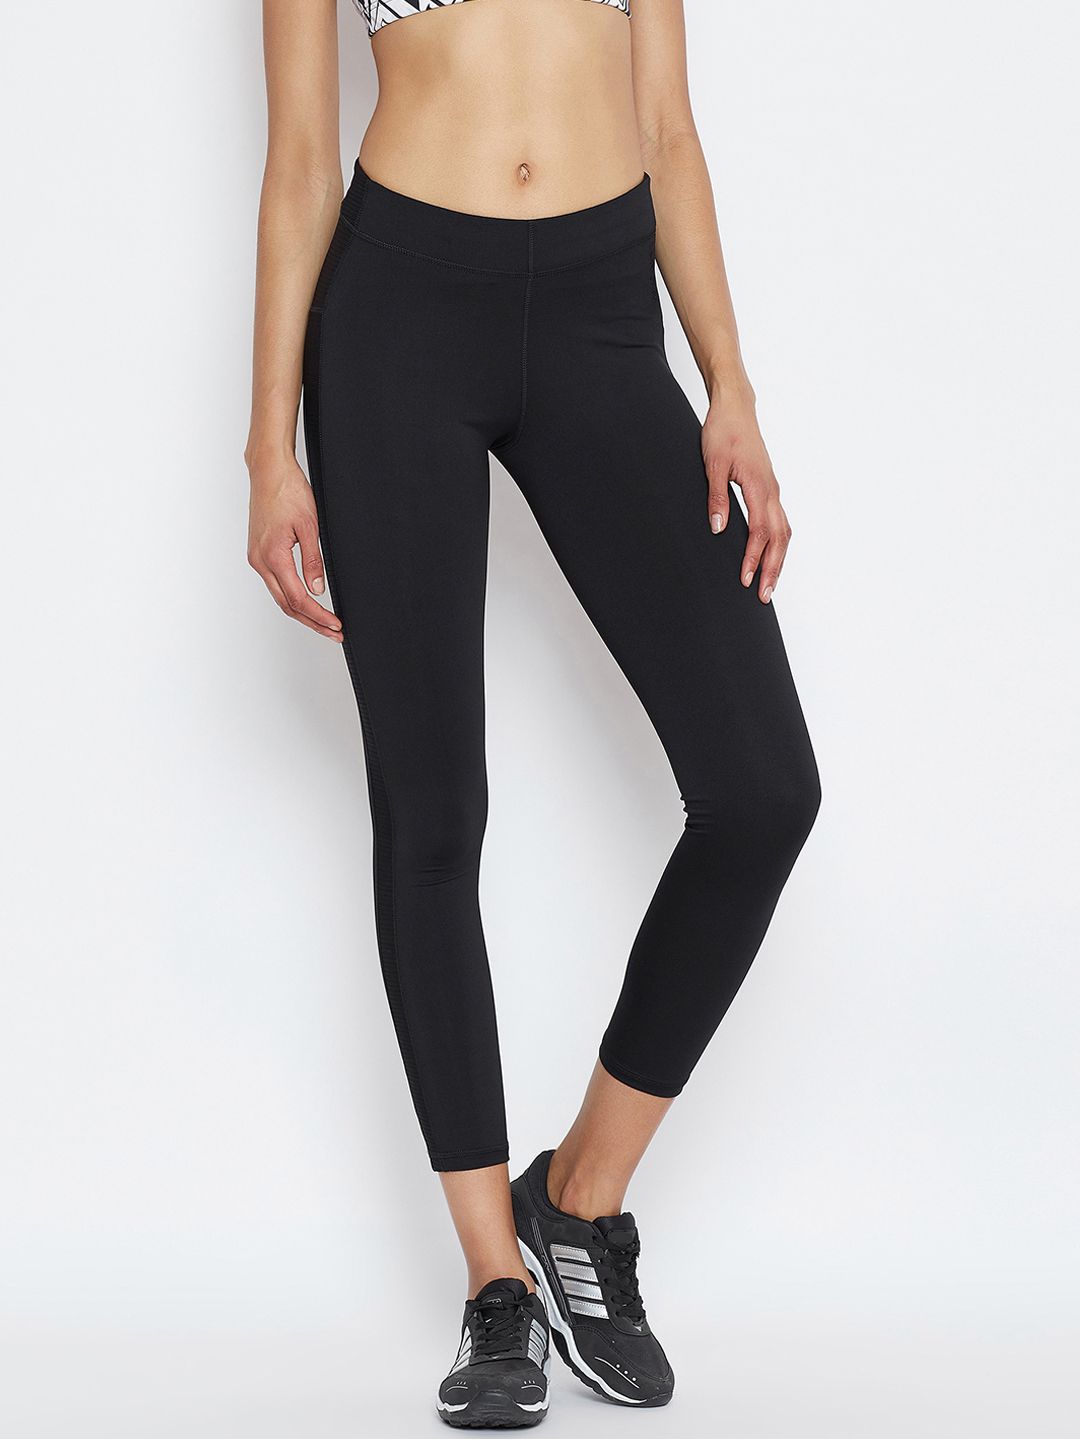 JUMP USA Women Black Solid Tights Price in India